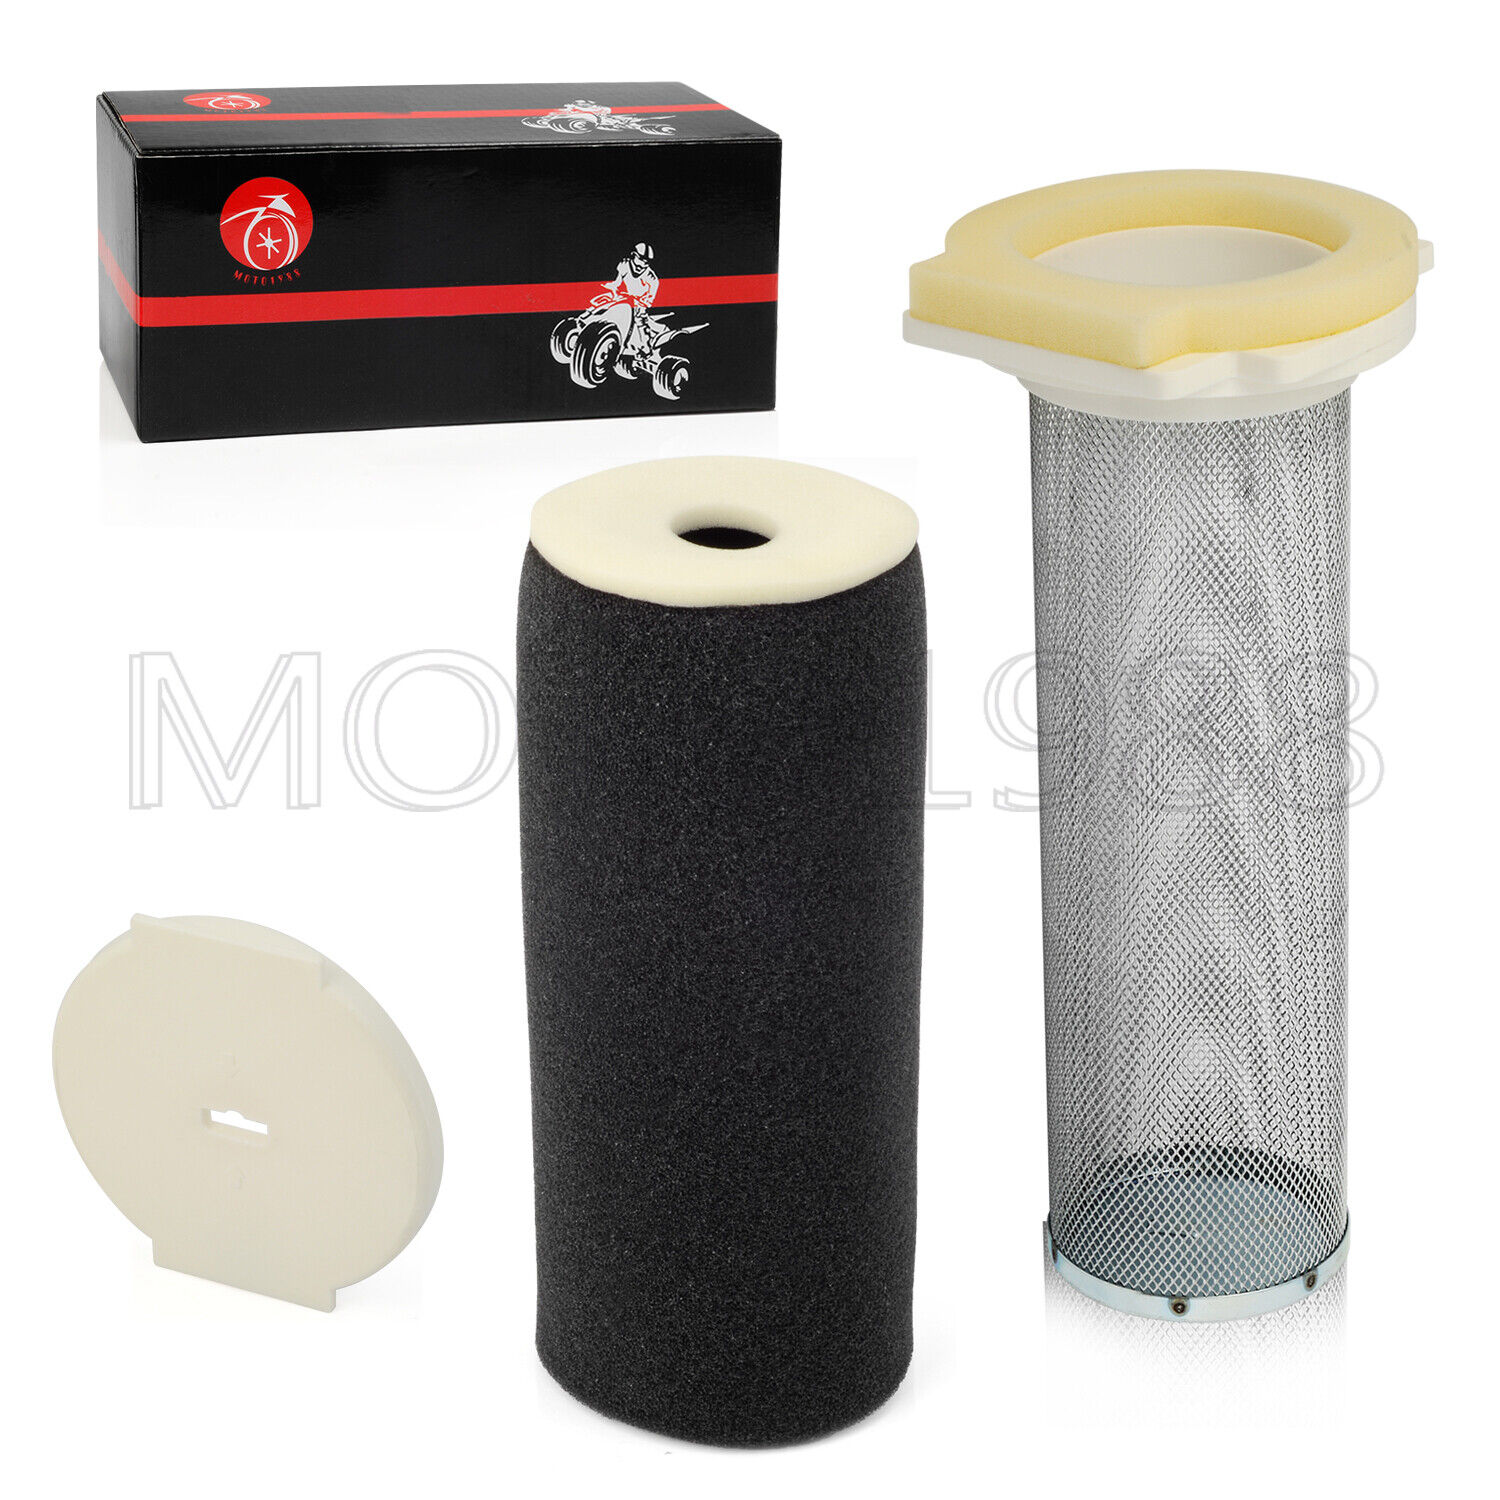 Air Filter & Cage Guide & CAP Kit For Yamaha Grizzly 600 660 98-08 1UY-14458-01 